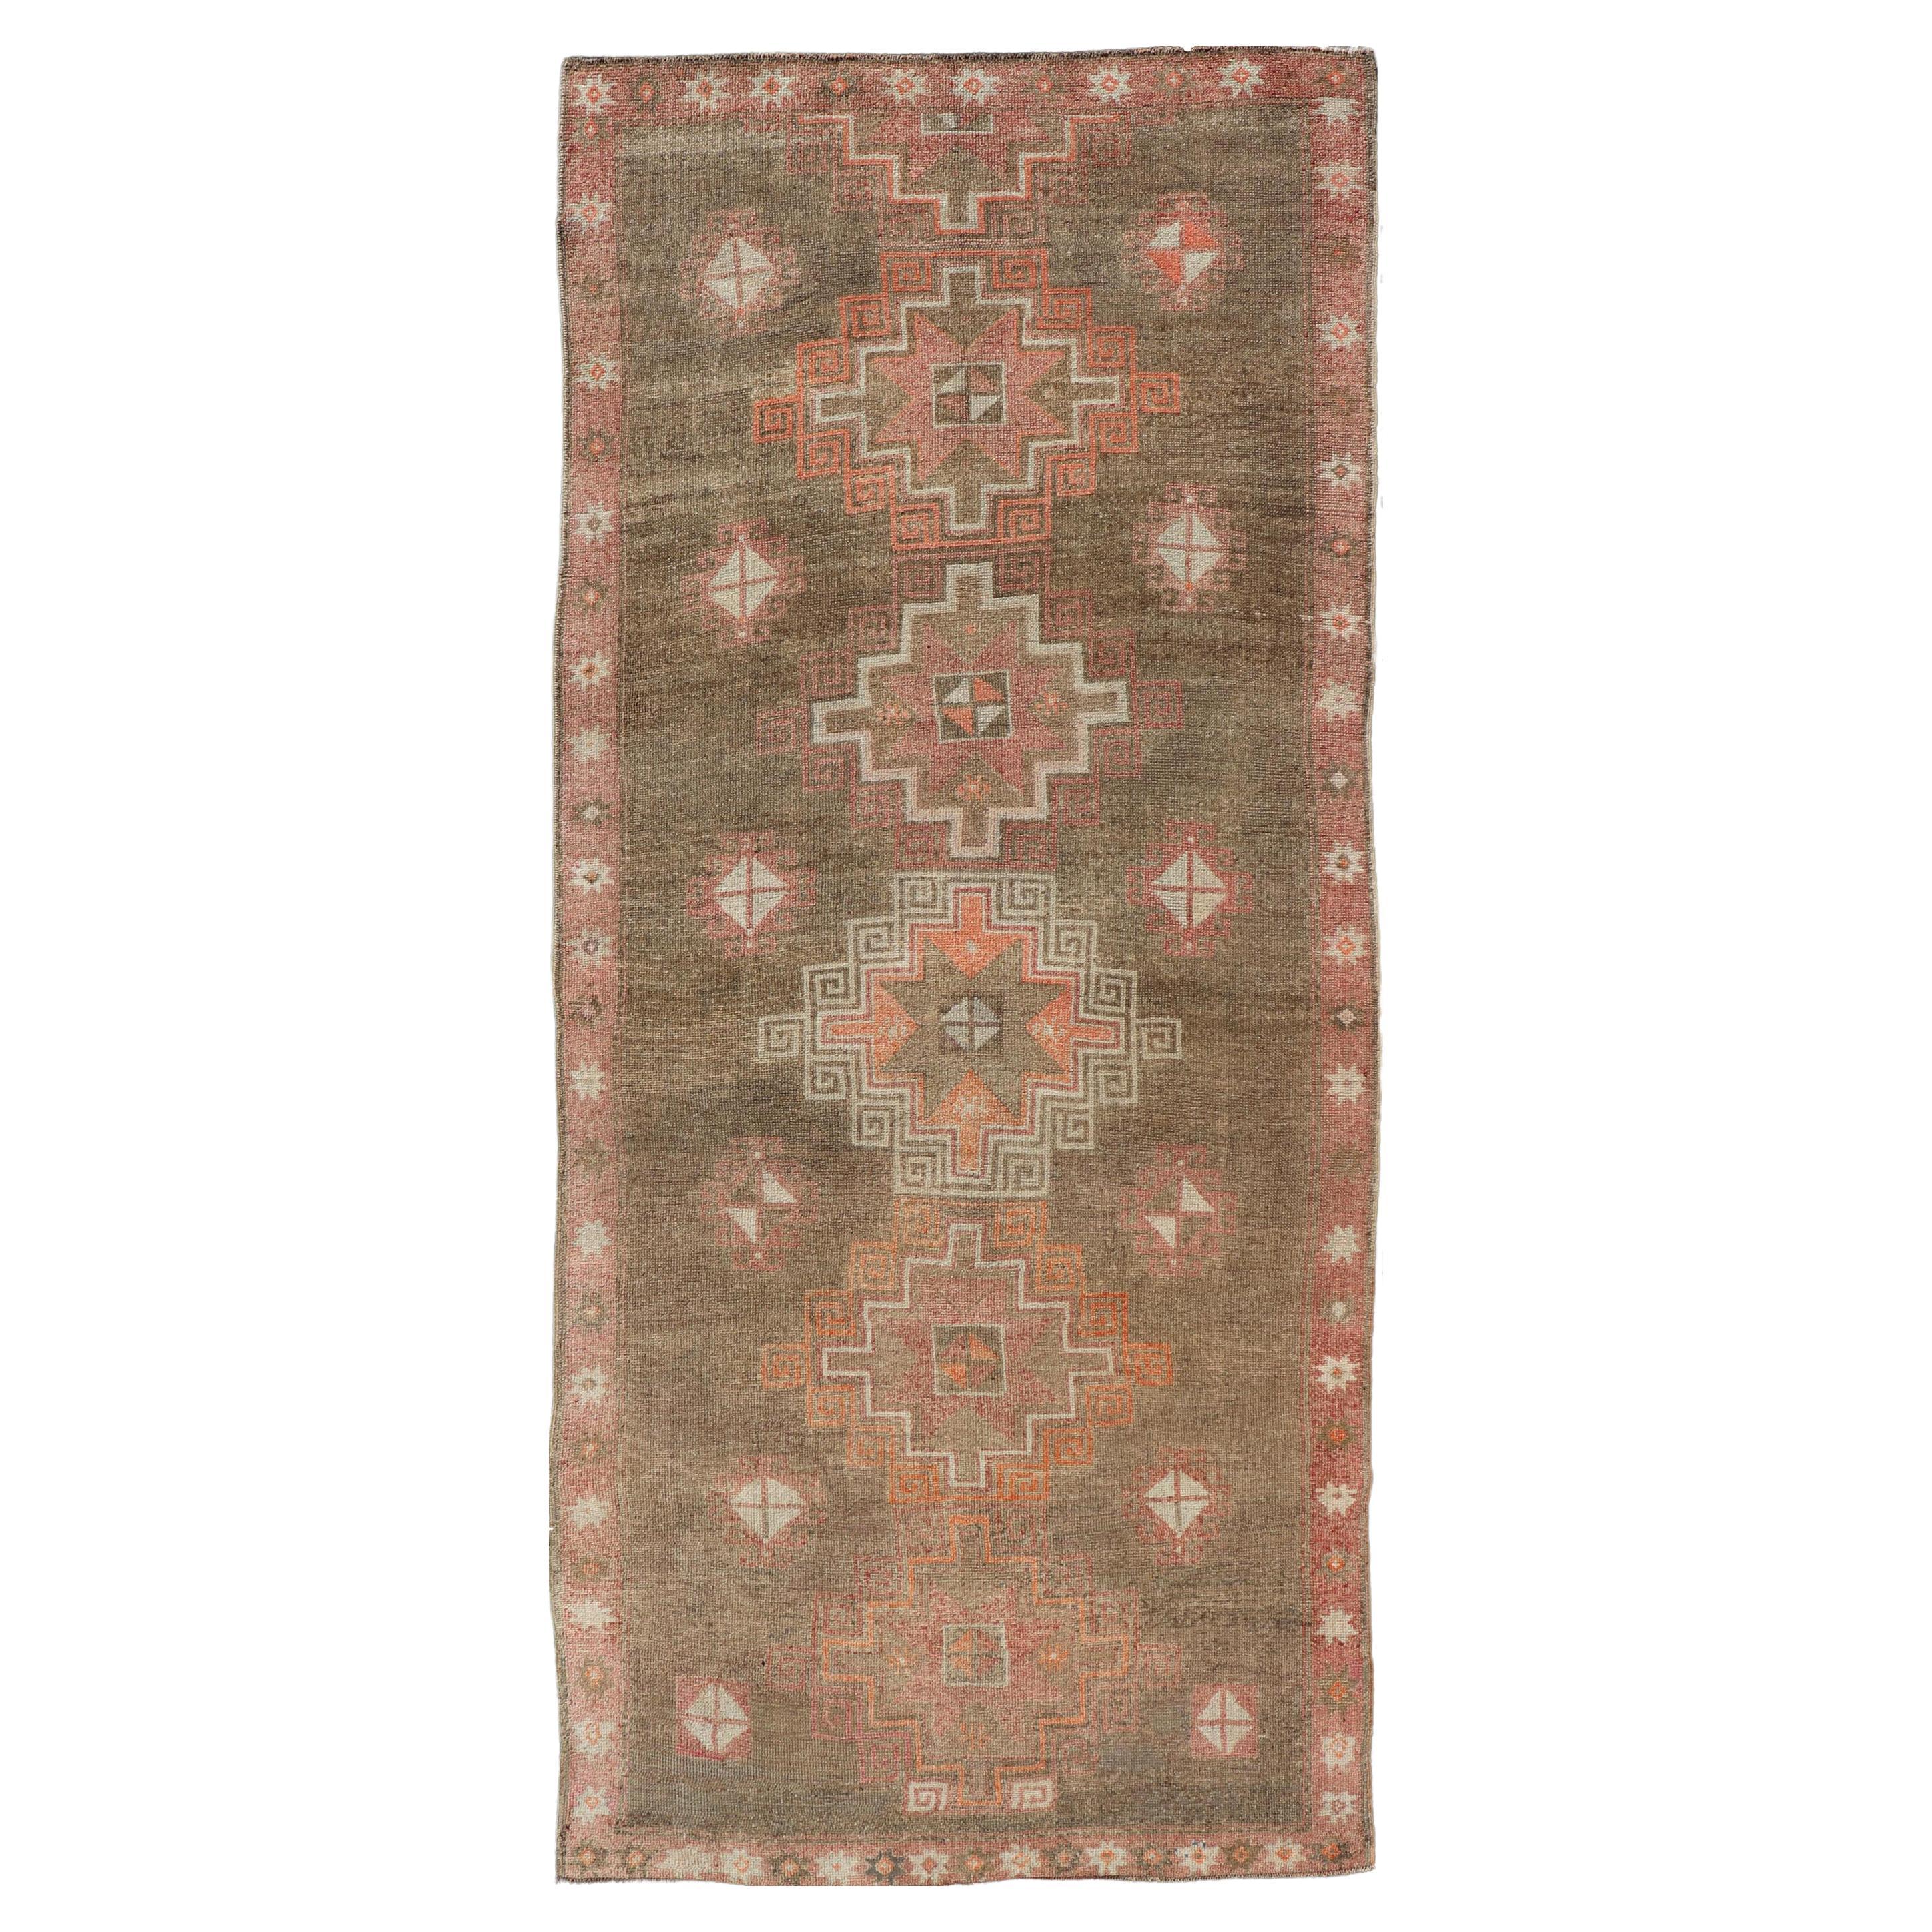 Turkish Kars Gallery Runner with Large Medallions in Red, Brown, Taupe, Tan